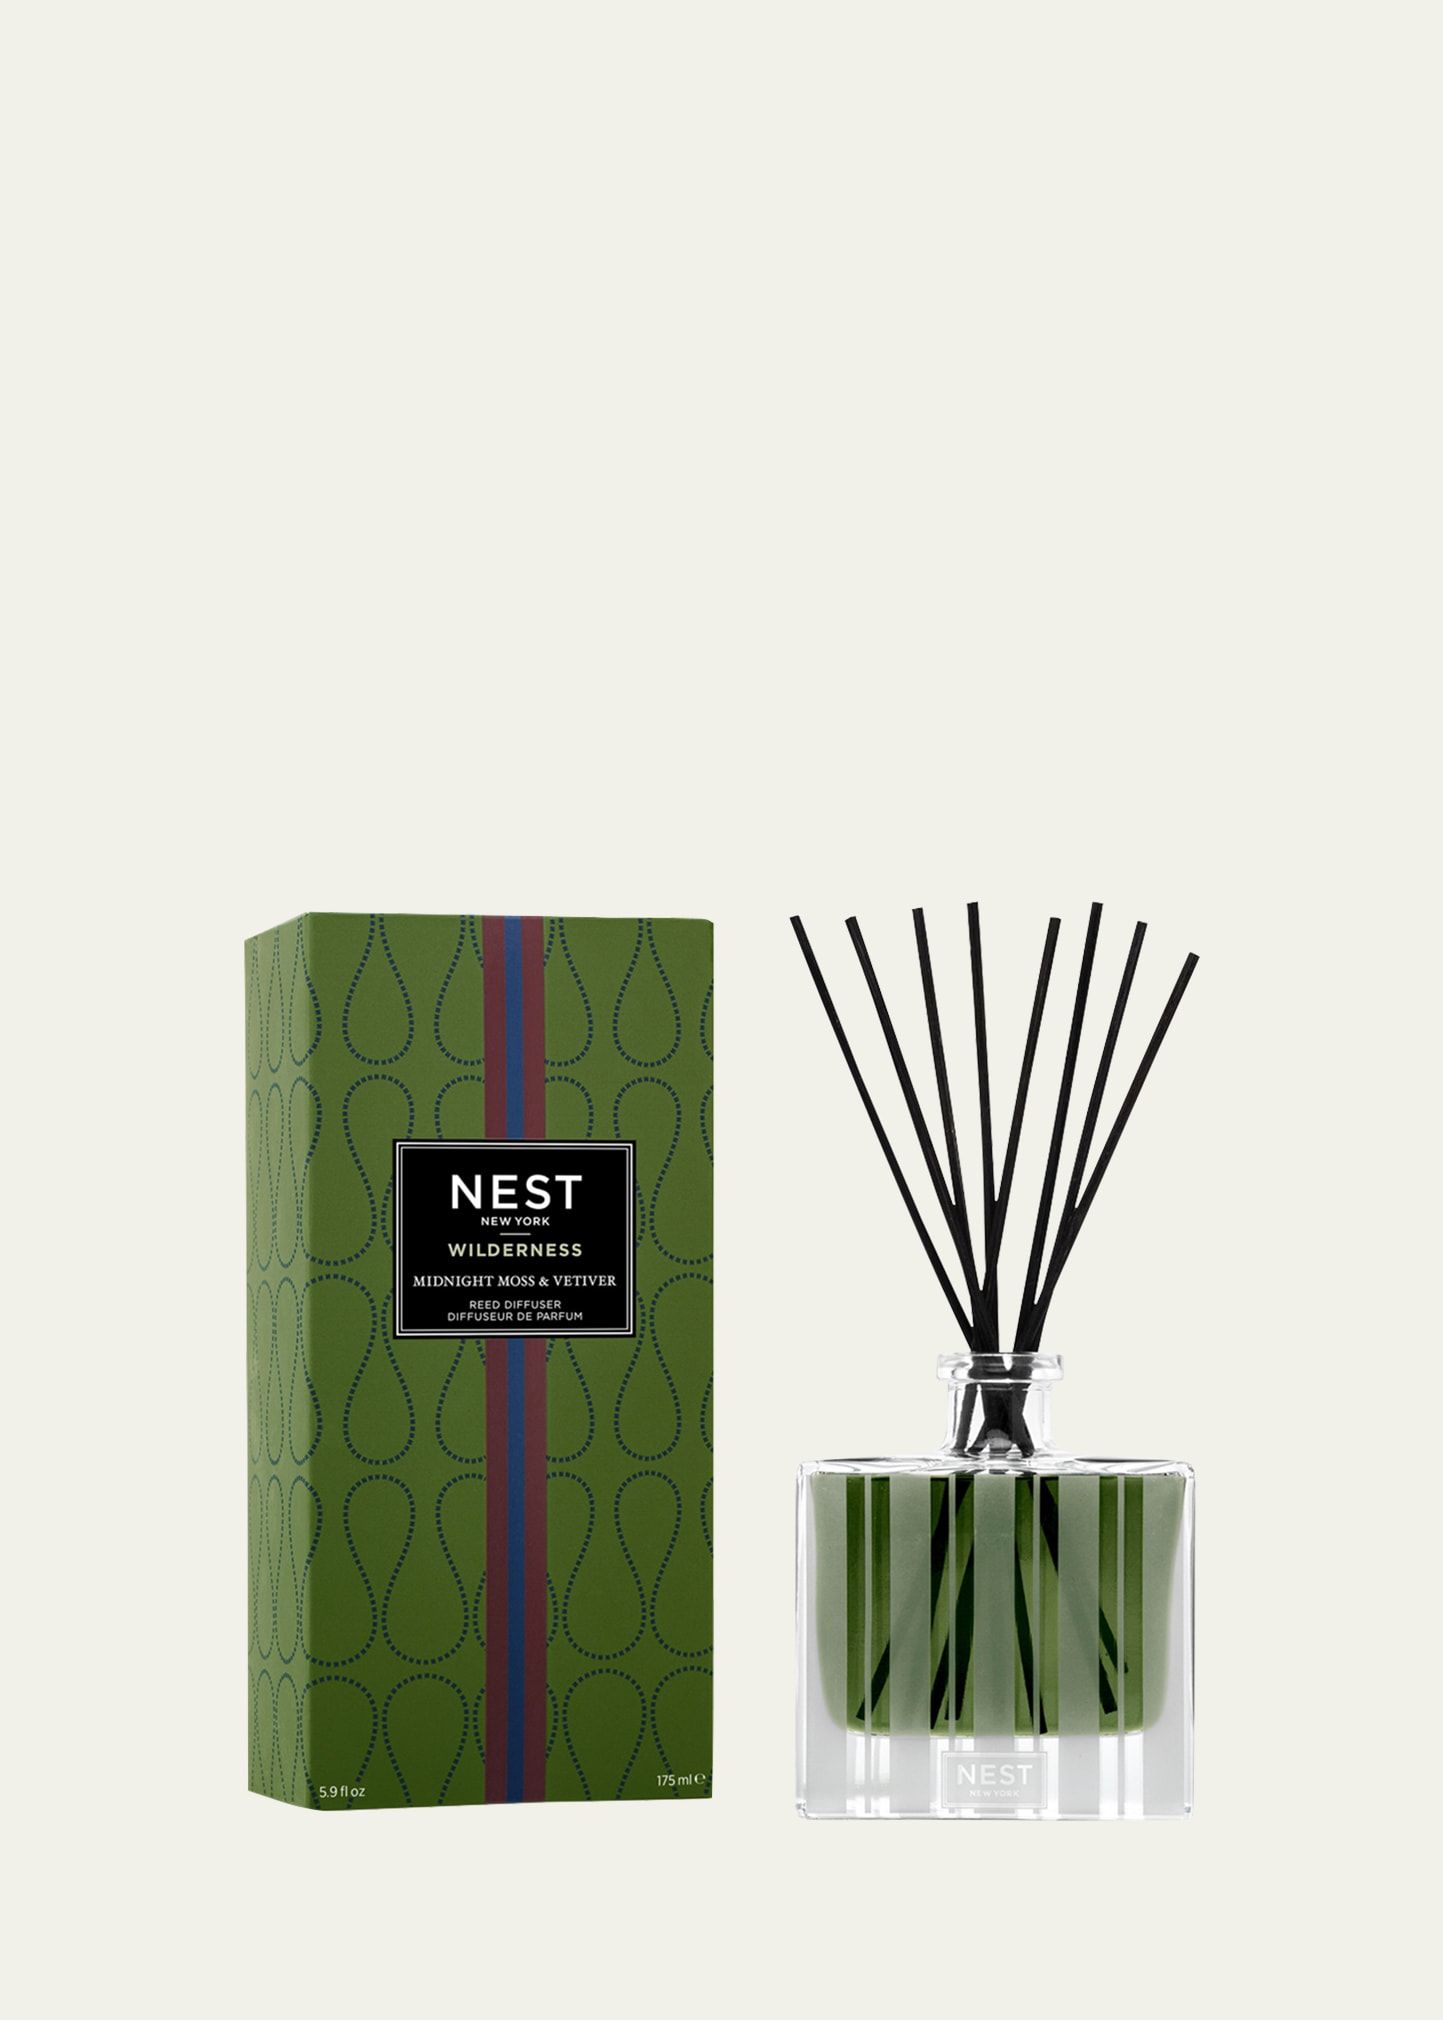 Wilderness Midnight Moss and Vetiver Reed Diffuser, 5.9 oz.